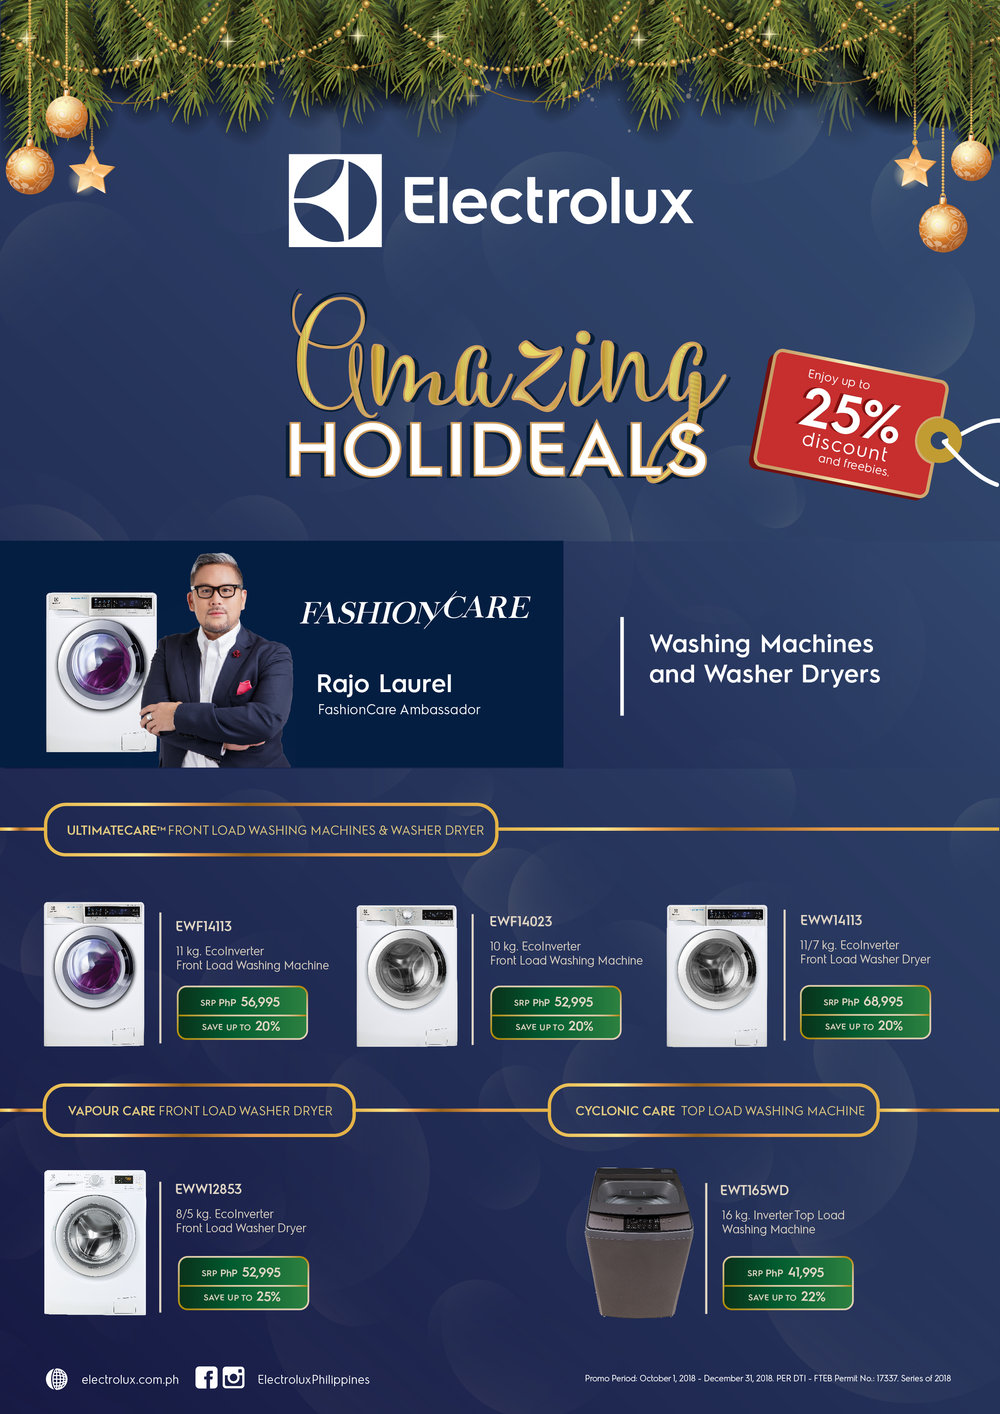 Don’t forget to share the artwork and link (https://www.electrolux.com.ph/promotions/amazing-holideals-laundry/) to Electrolux’s Amazing Holideals promo on your blog post.